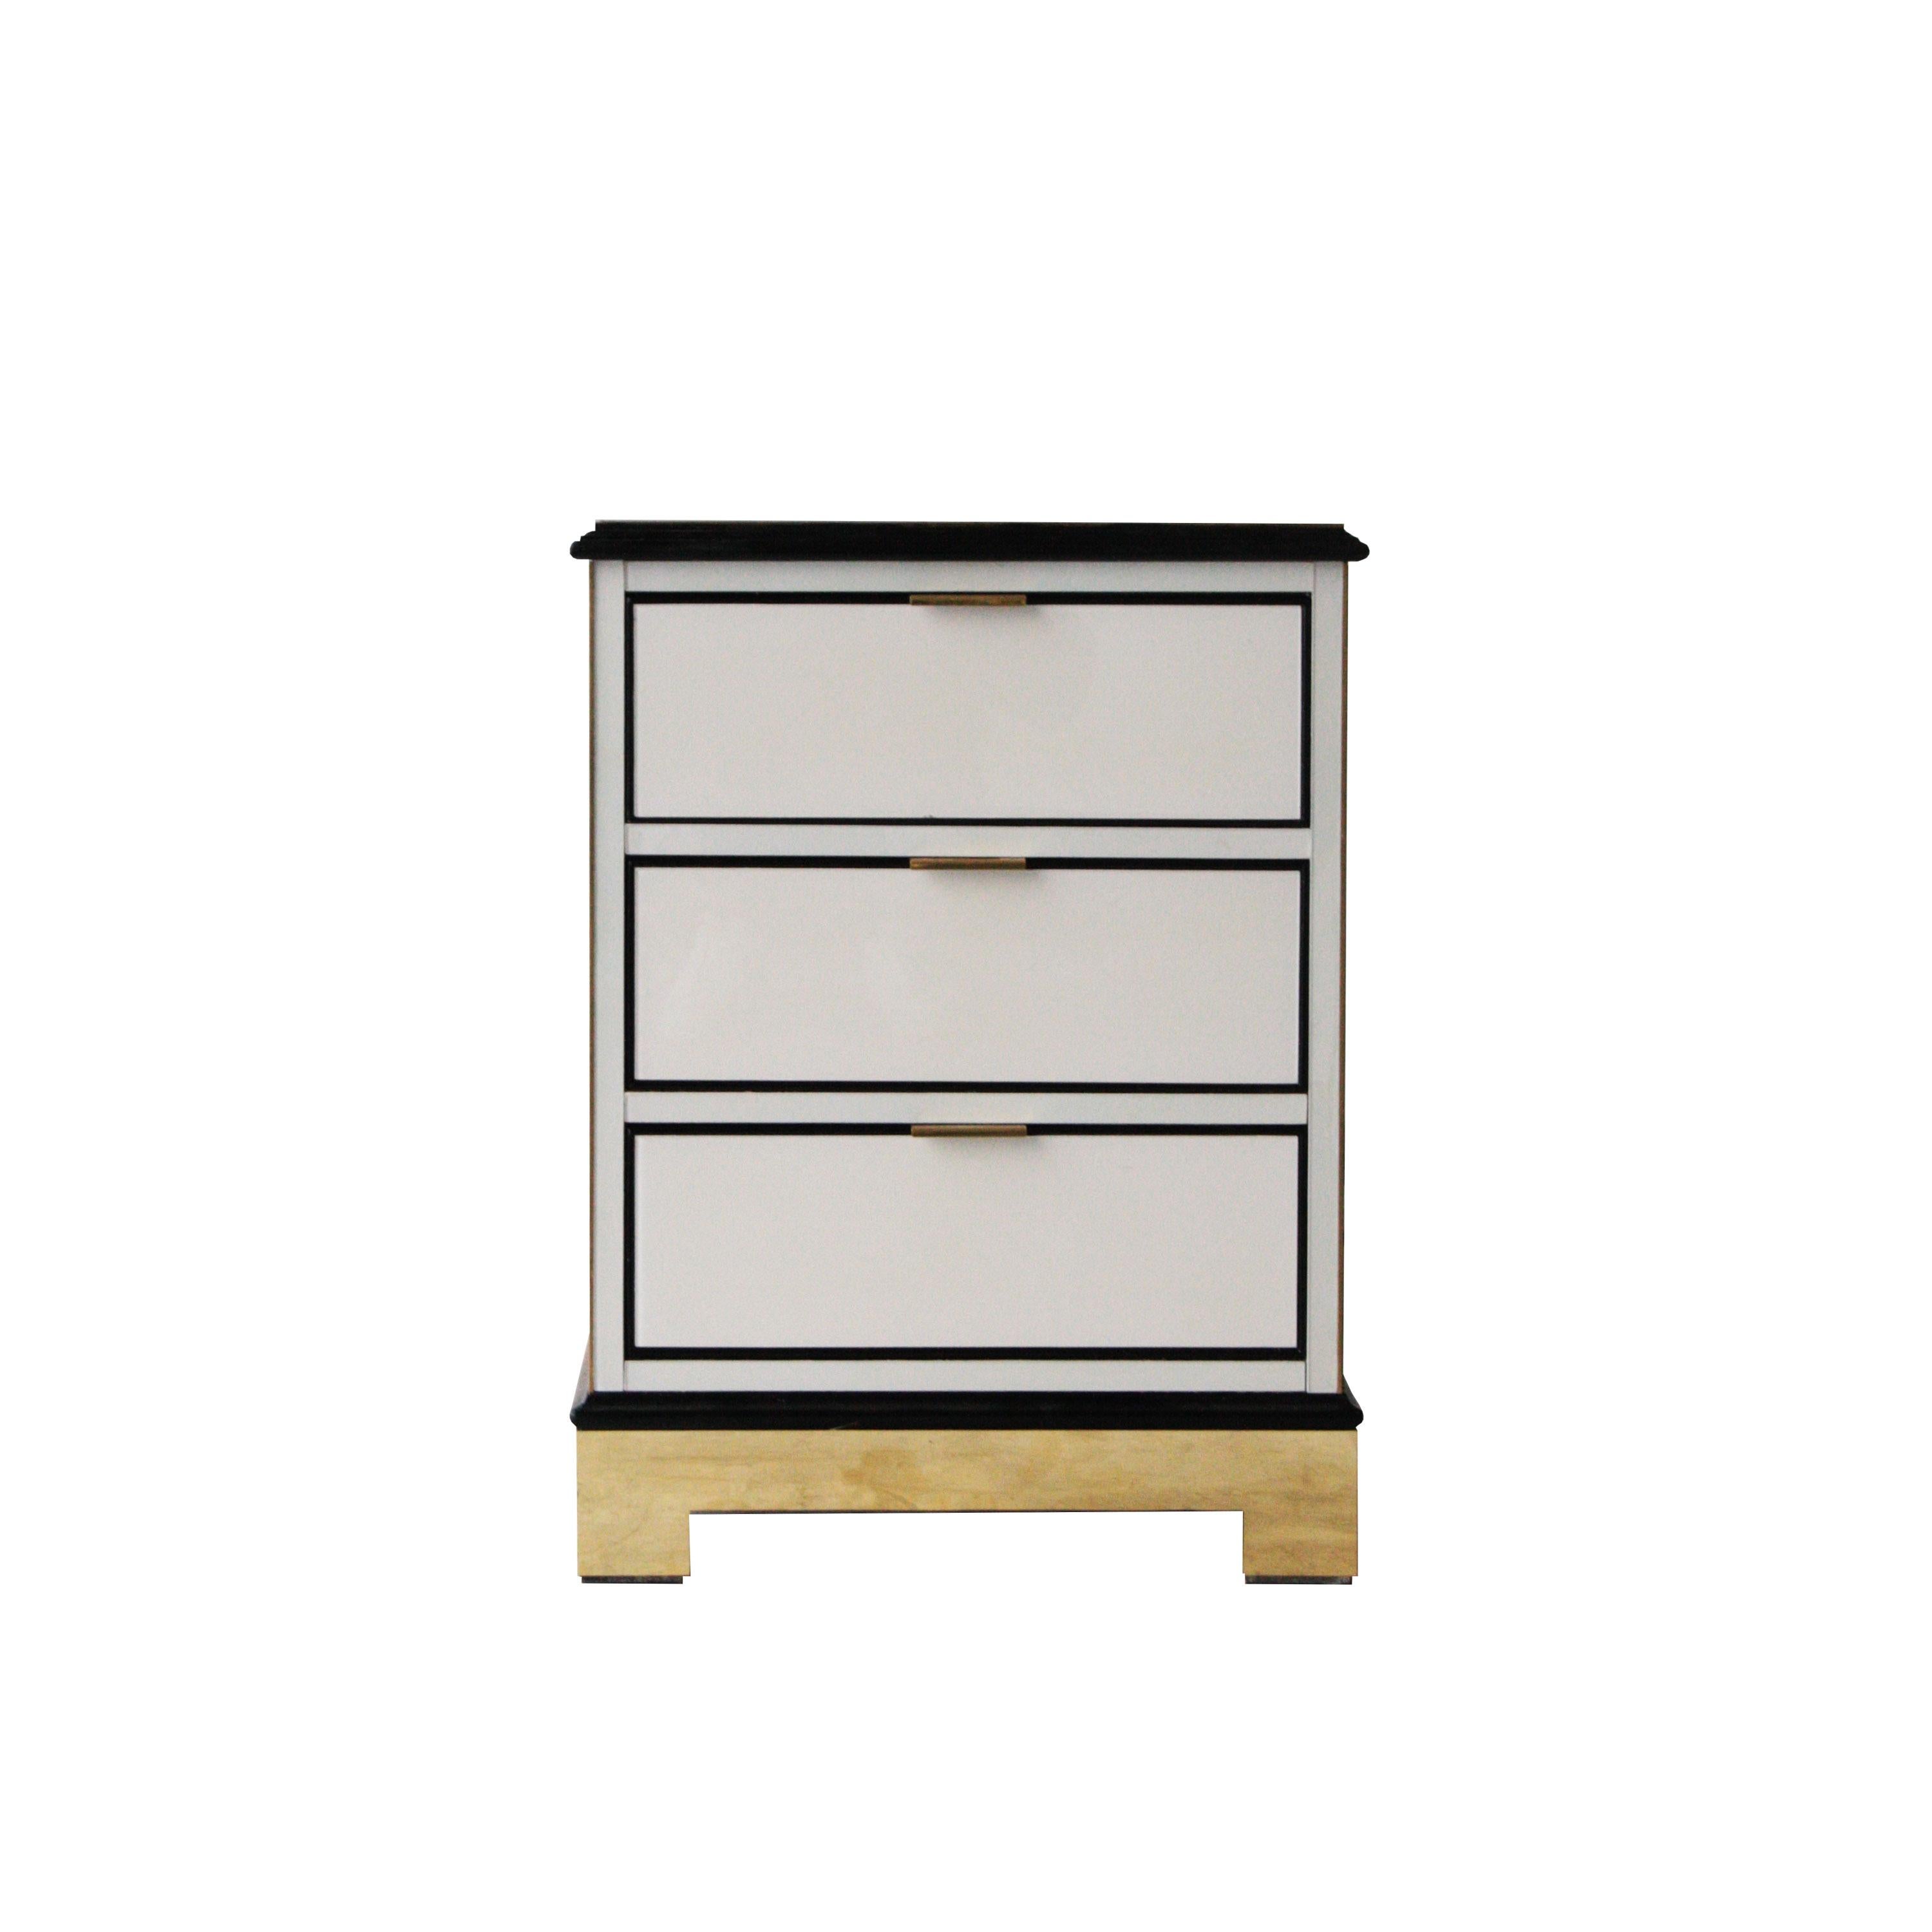 Pair of rectangular bedside tables with gold metal details and coated in grey, black and white crystals with three drawers.